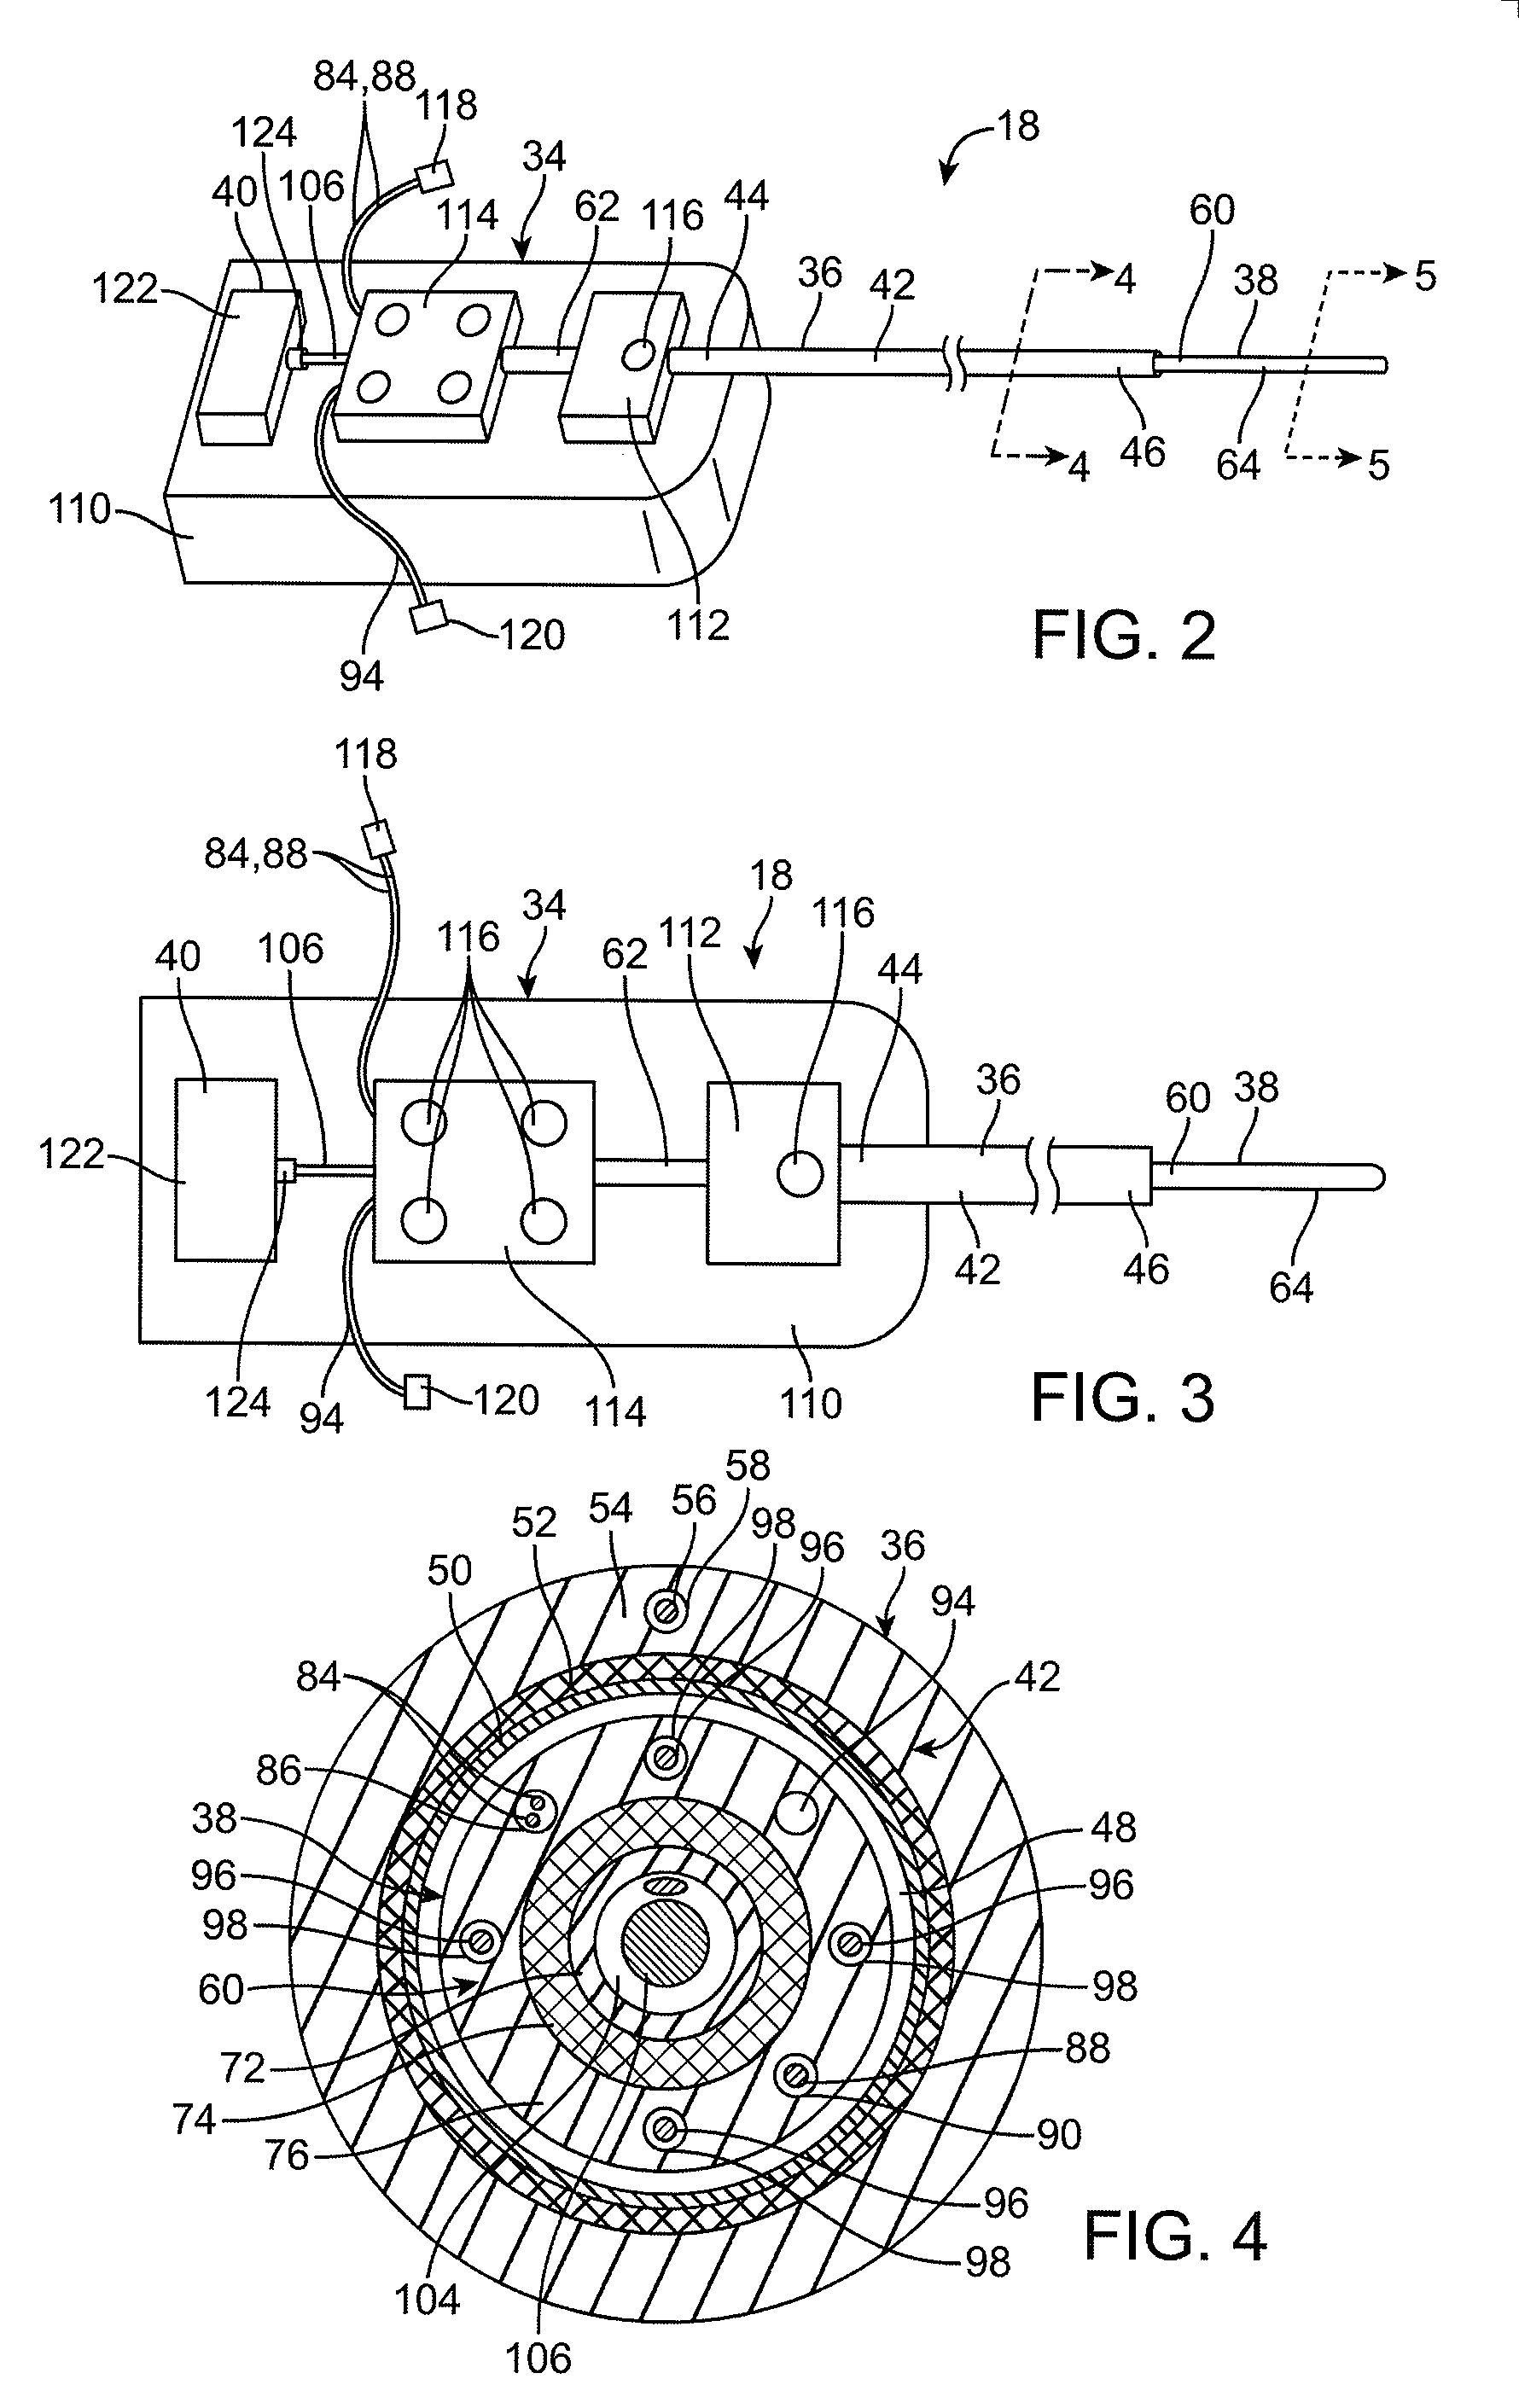 Apparatus and method for sensing force